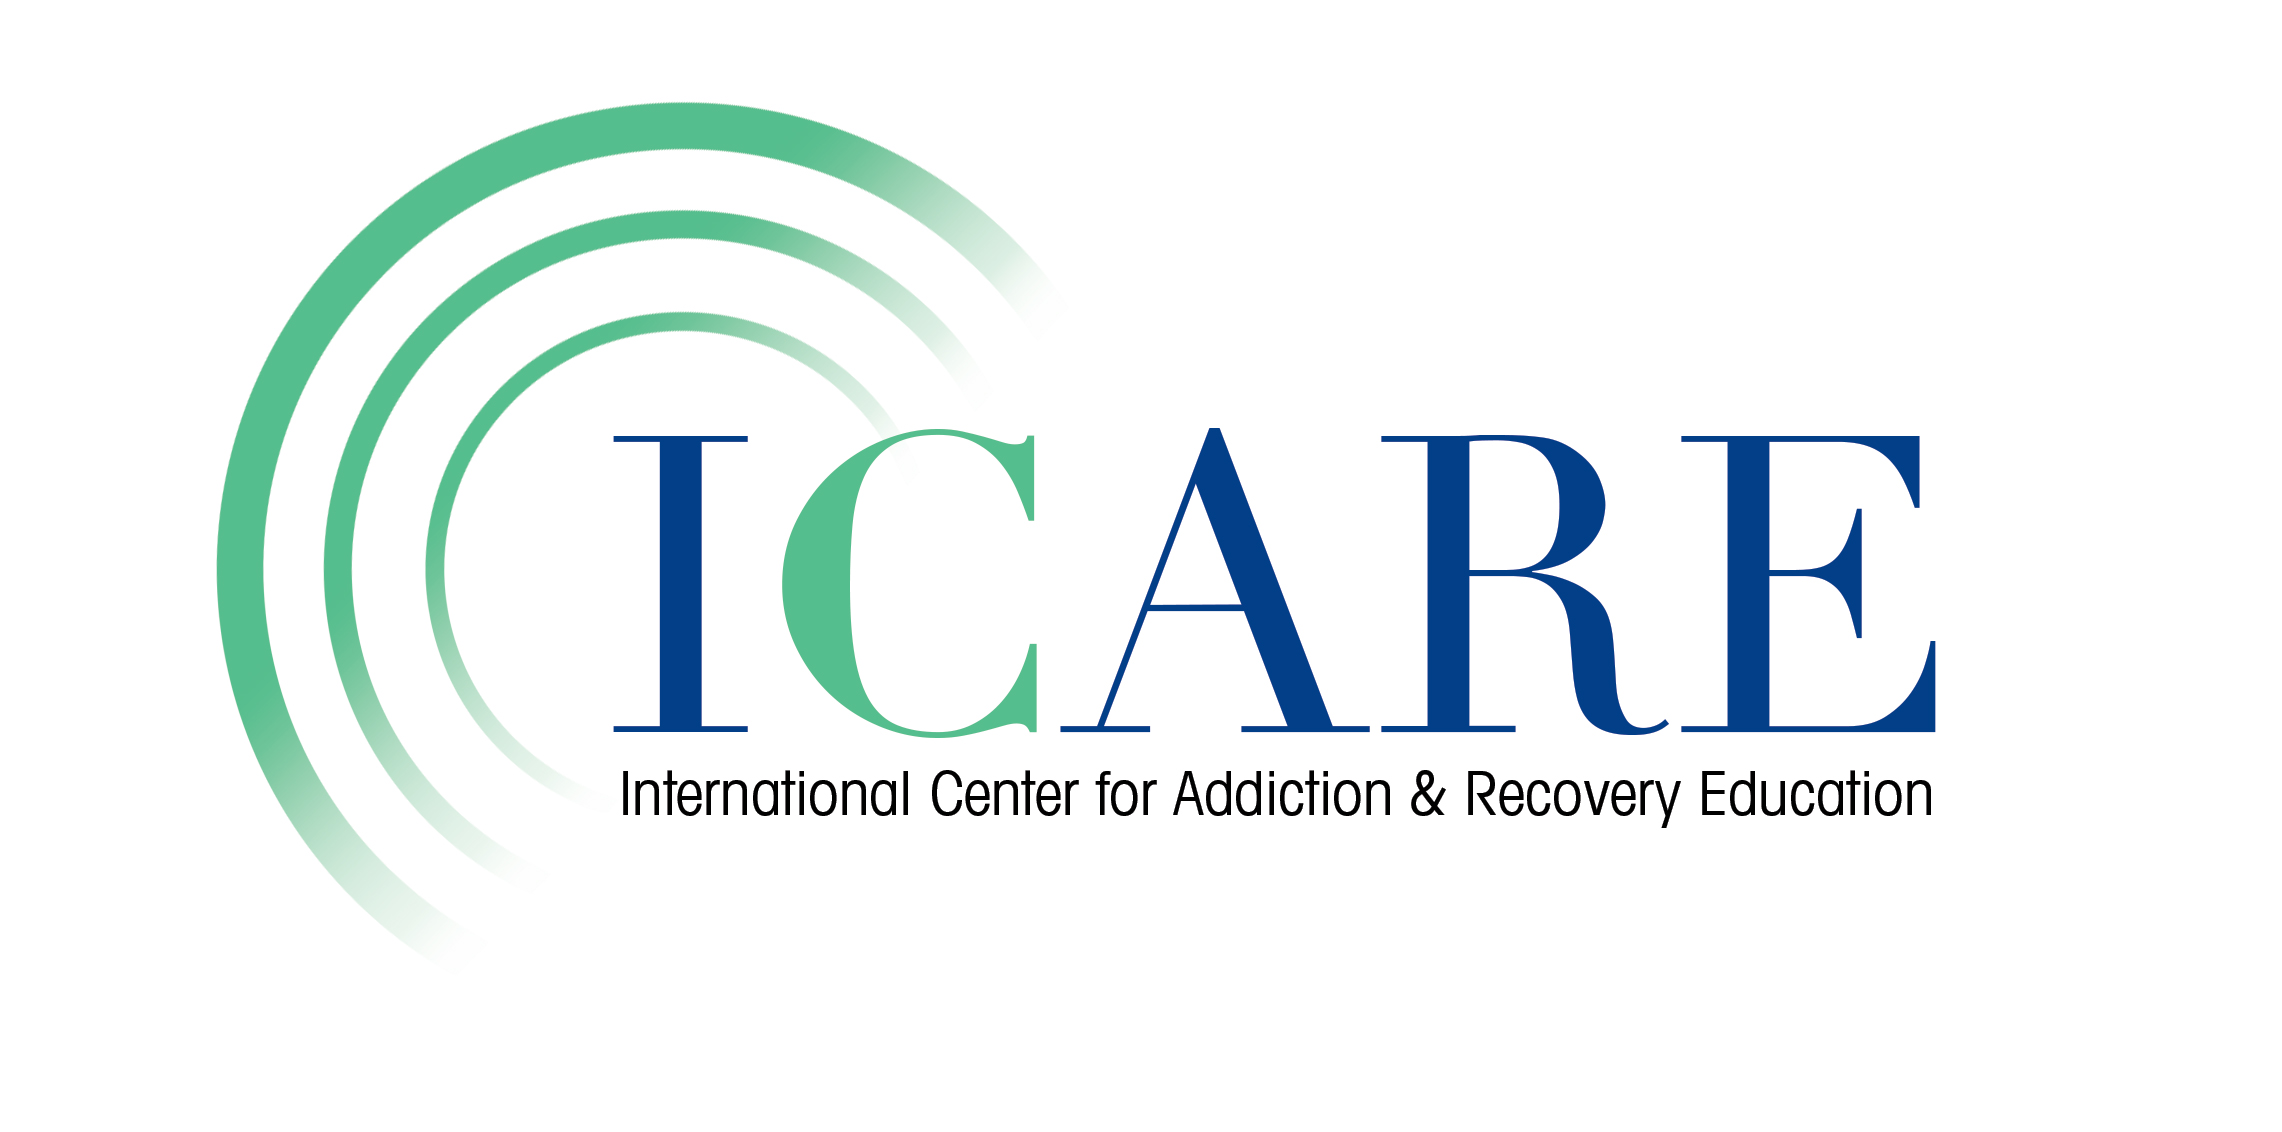 International Center for Addiction and Recovery Education (ICARE)